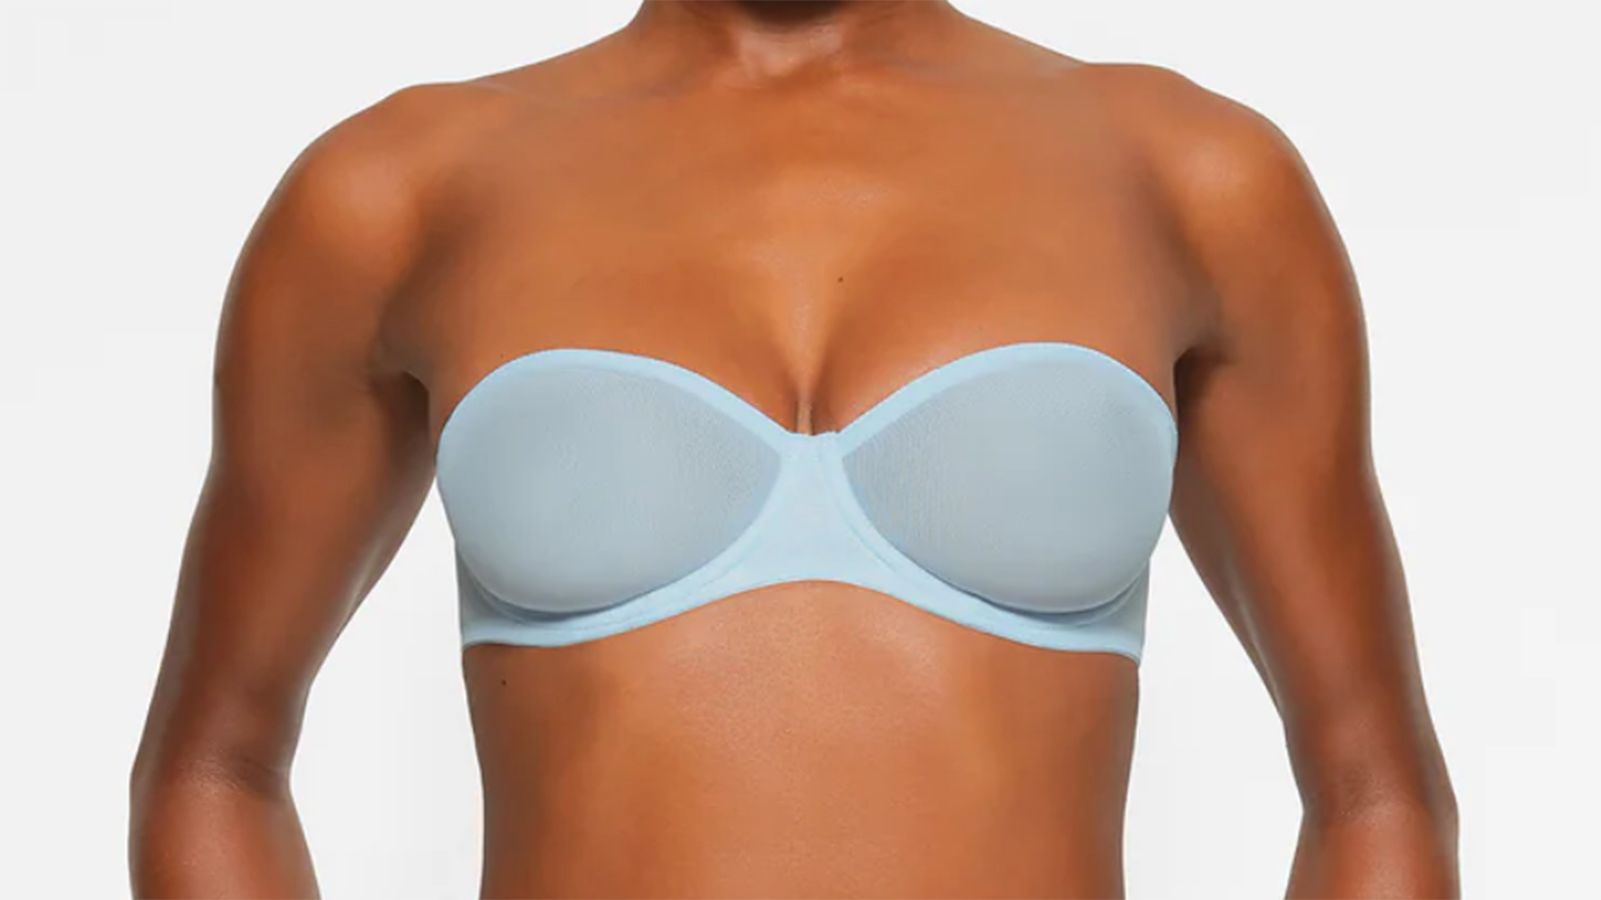 👙BRA HACK 3: 🤩THE BEST STRAPLESS BRA TIP YOU WILL EVER SEE!! 👀🏆👏🏾  👀🎉